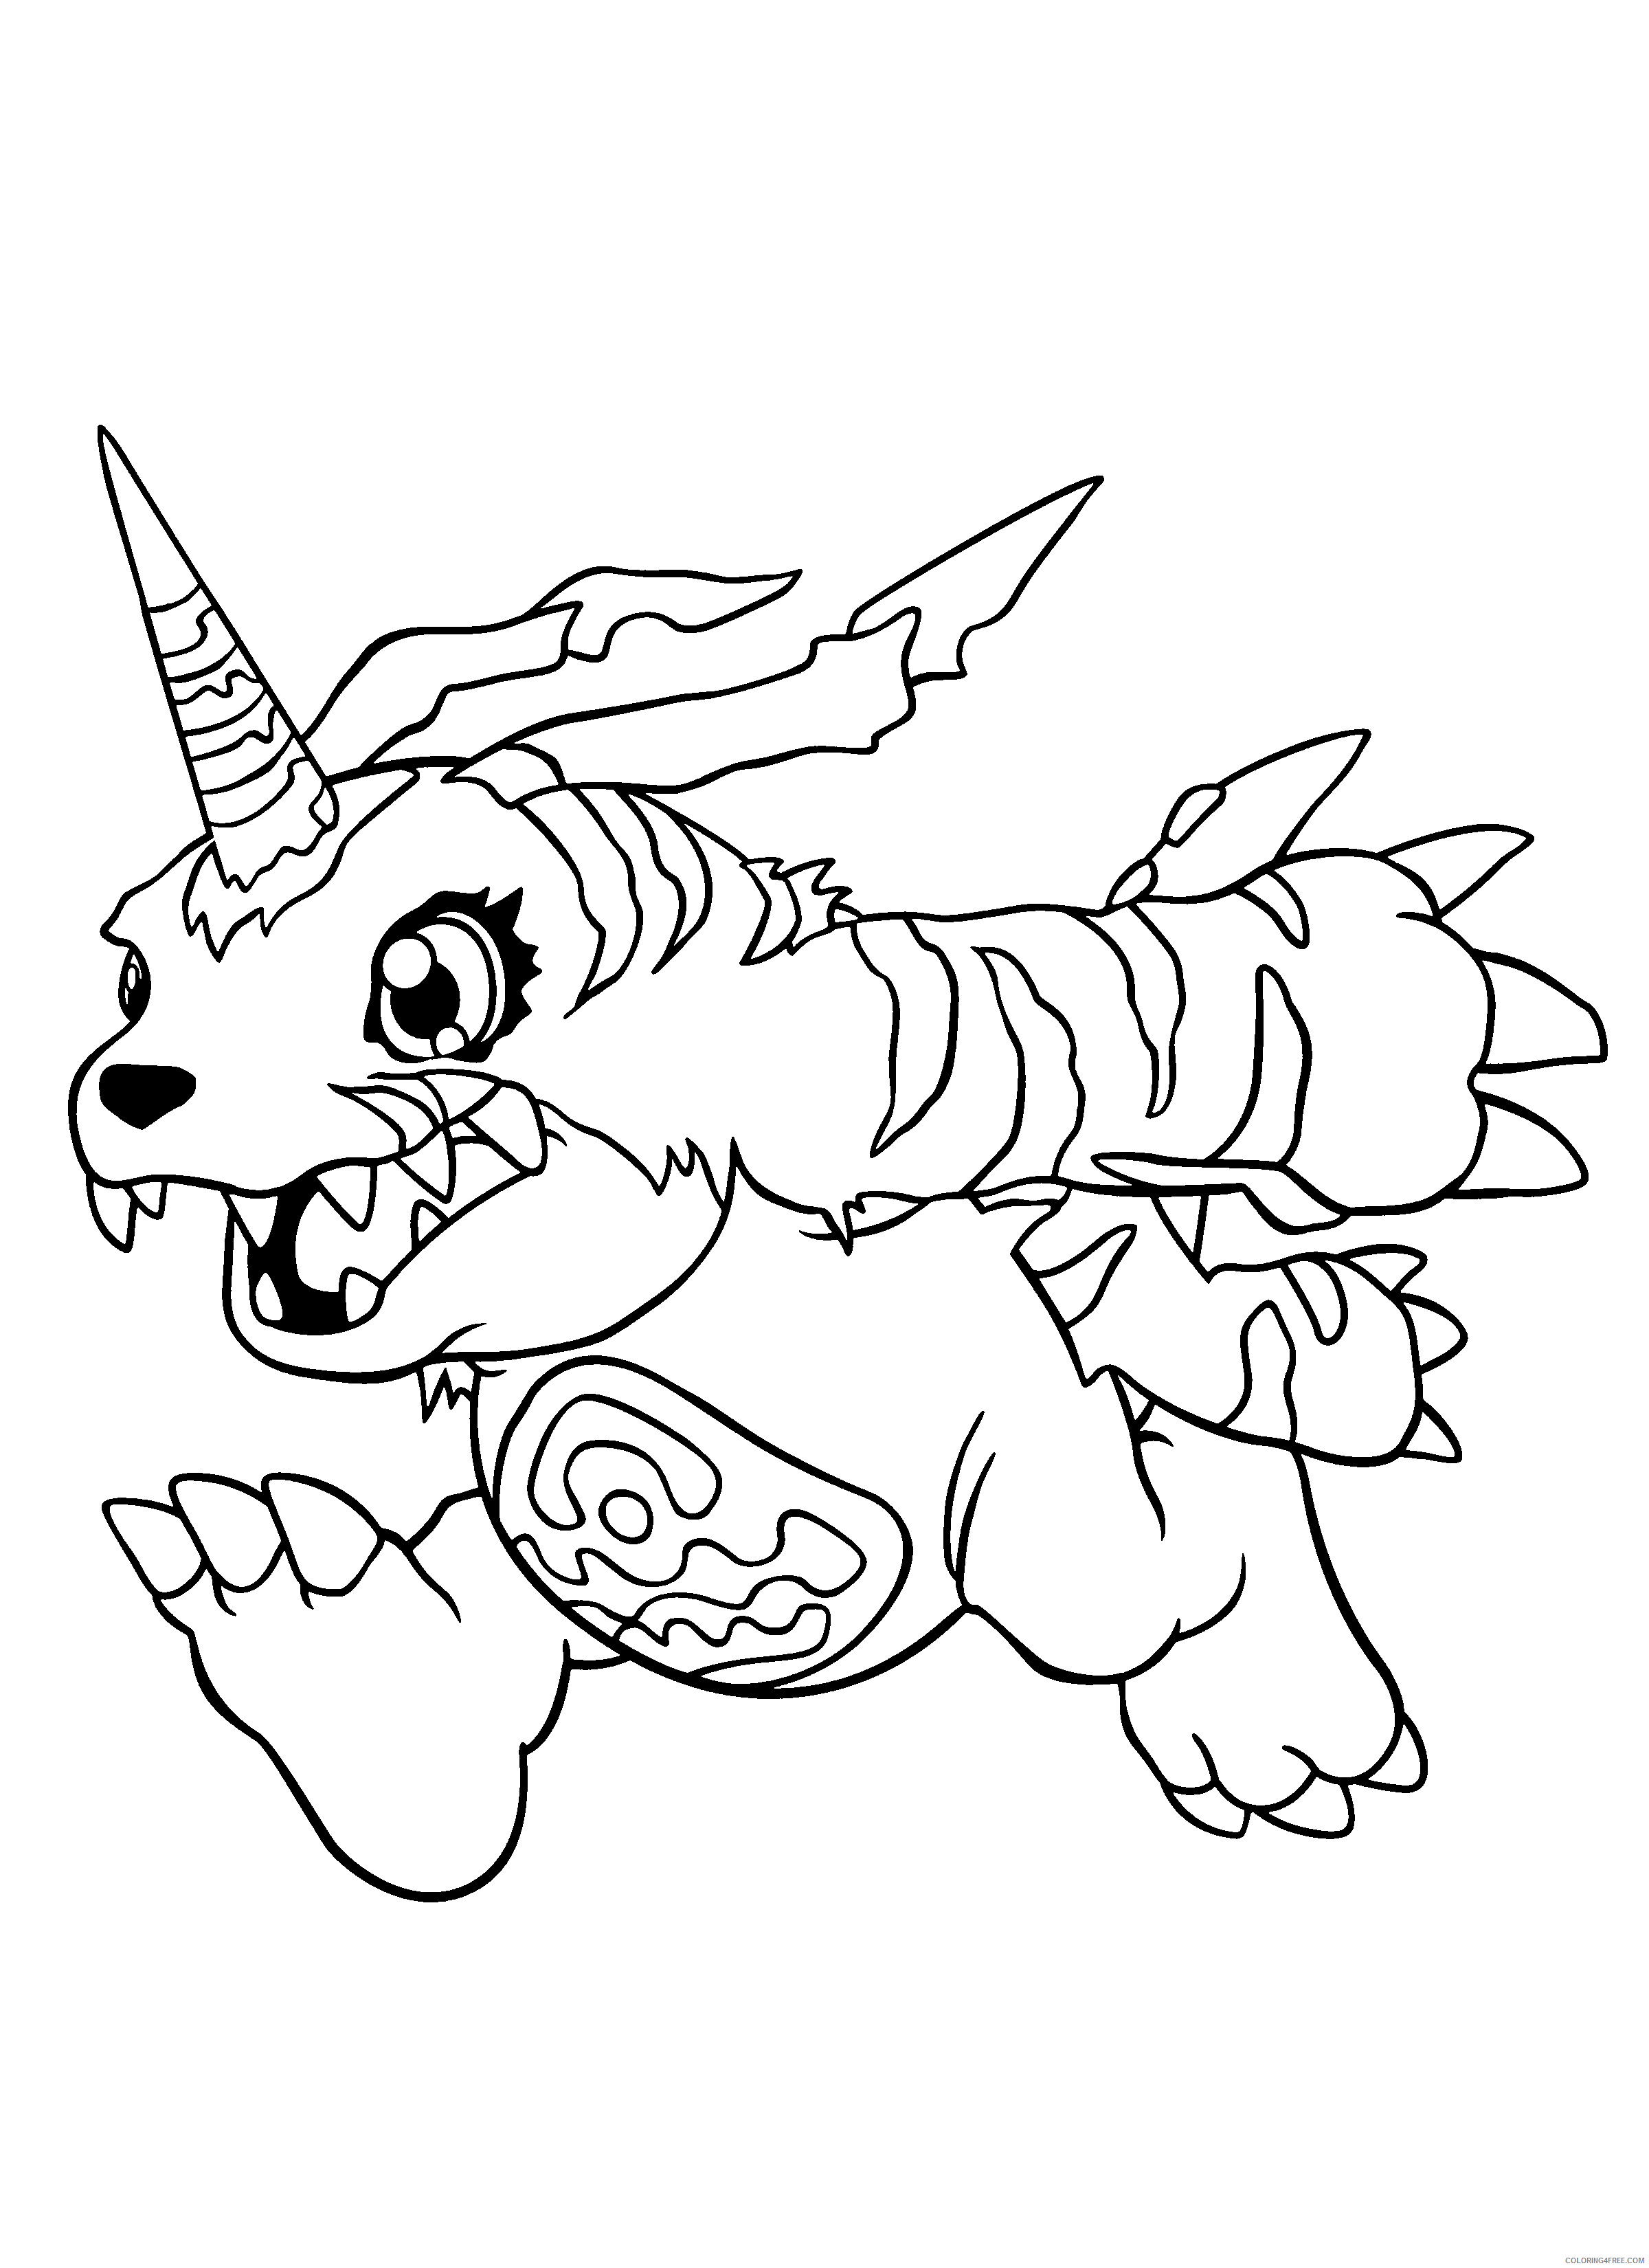 Digimon Printable Coloring Pages Anime digimon 246 2021 0328 Coloring4free